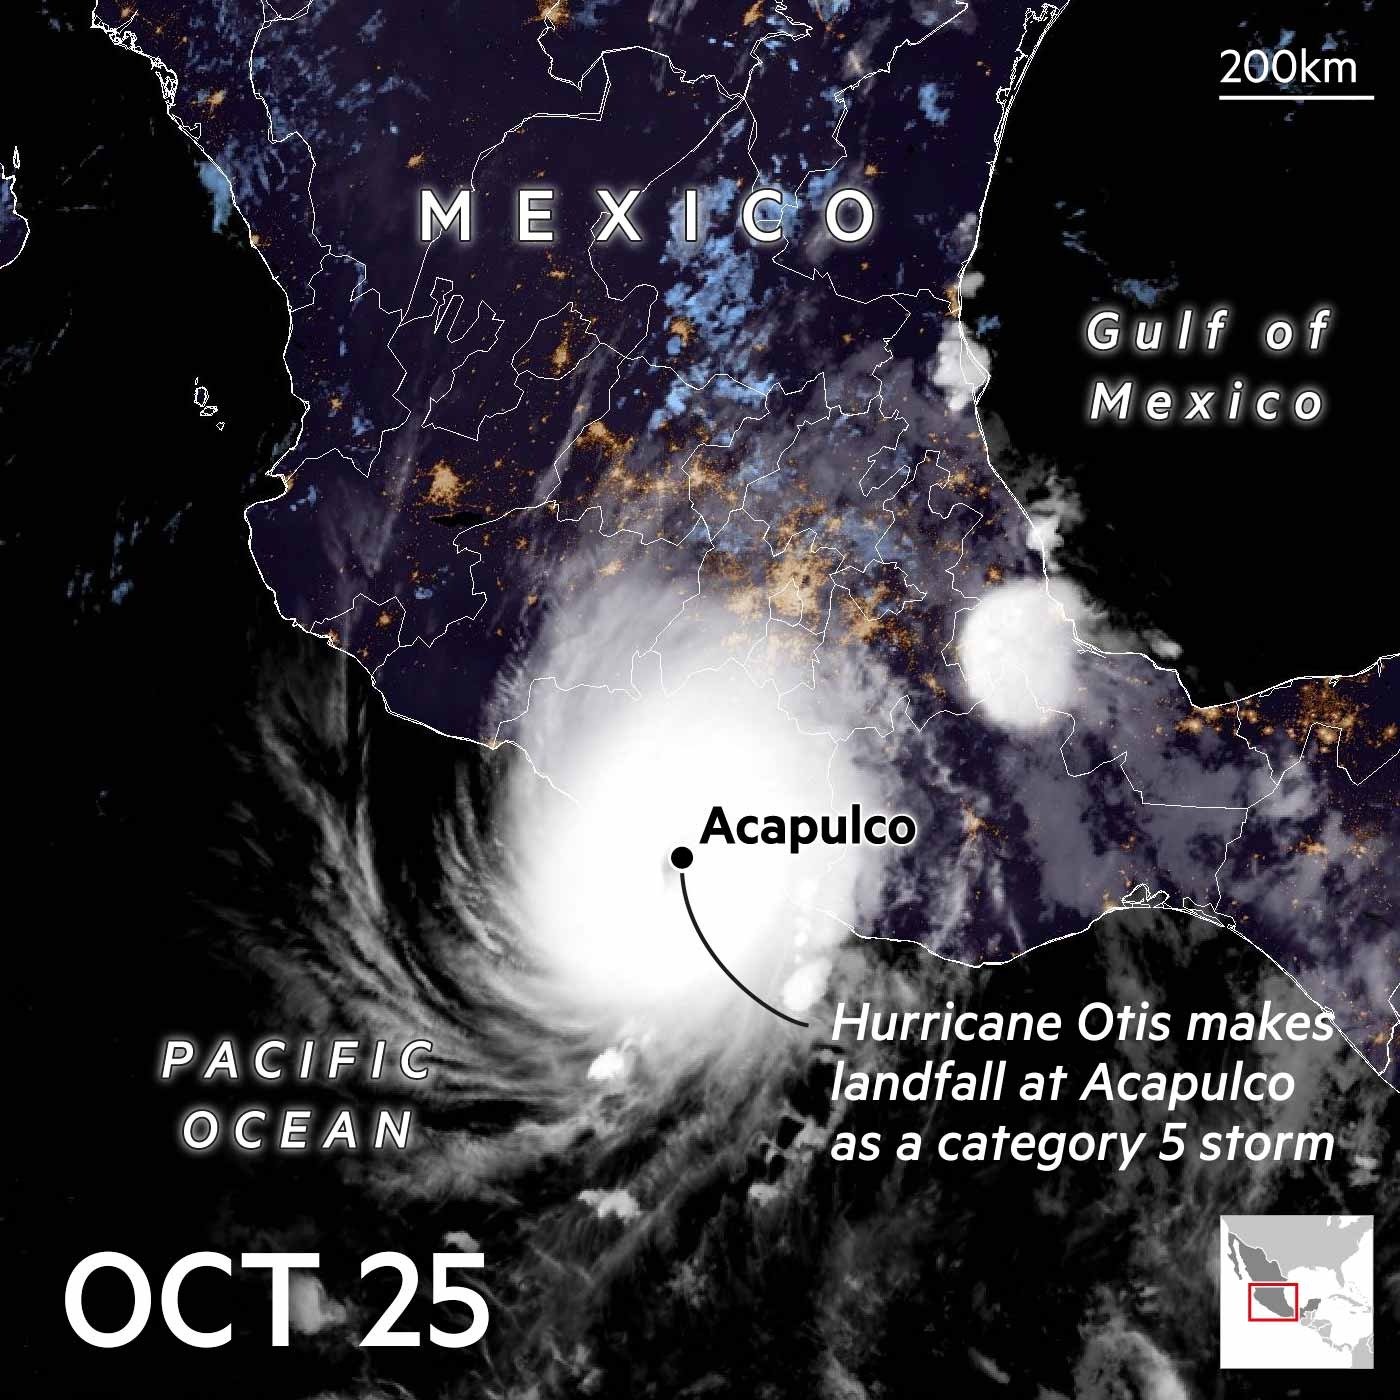 Satellite image showing Hurricane Otis make landfall as a category 5 storm at Acapulco in Mexico 